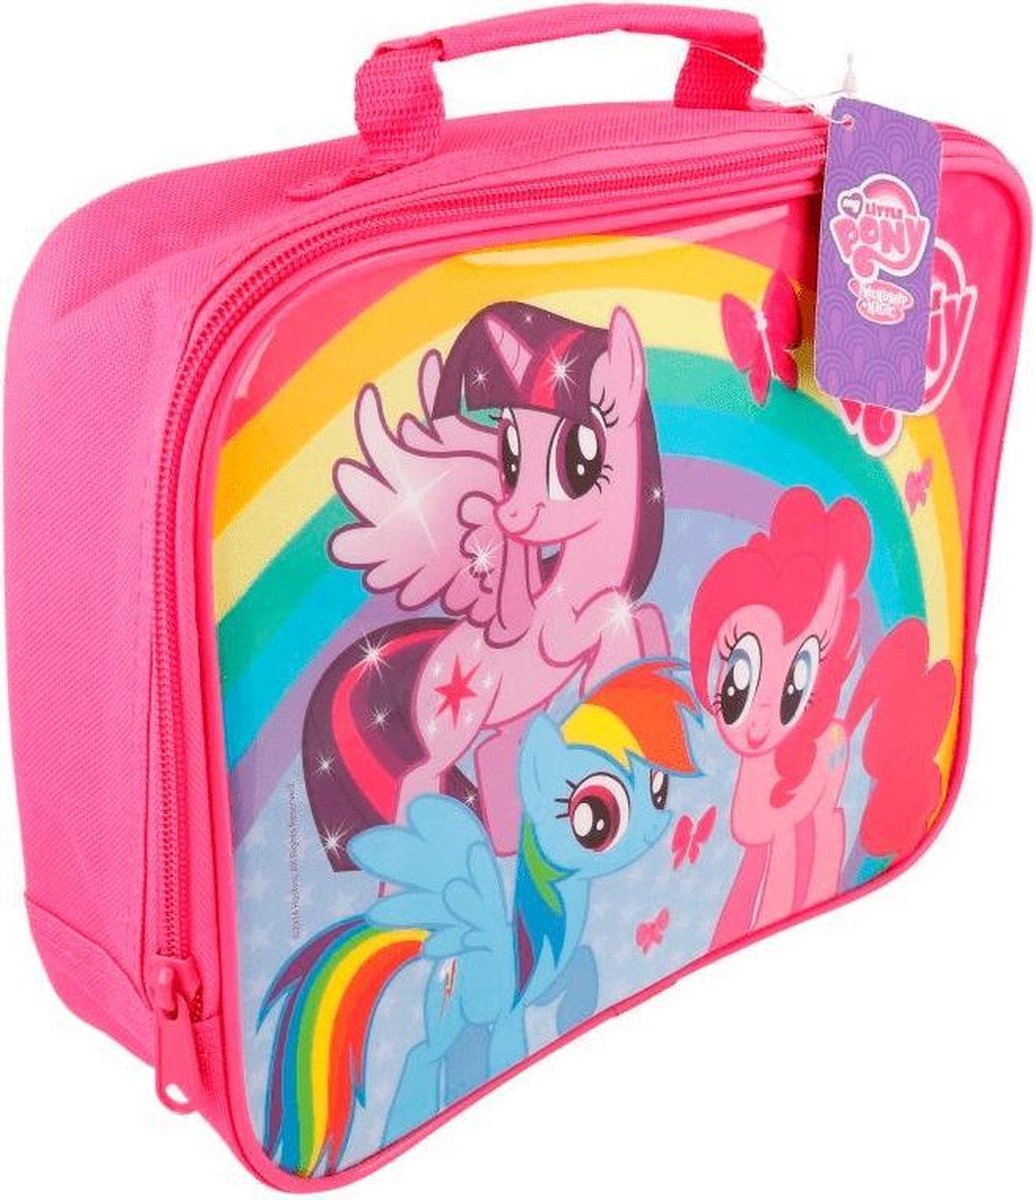 My Little Pony luch bag